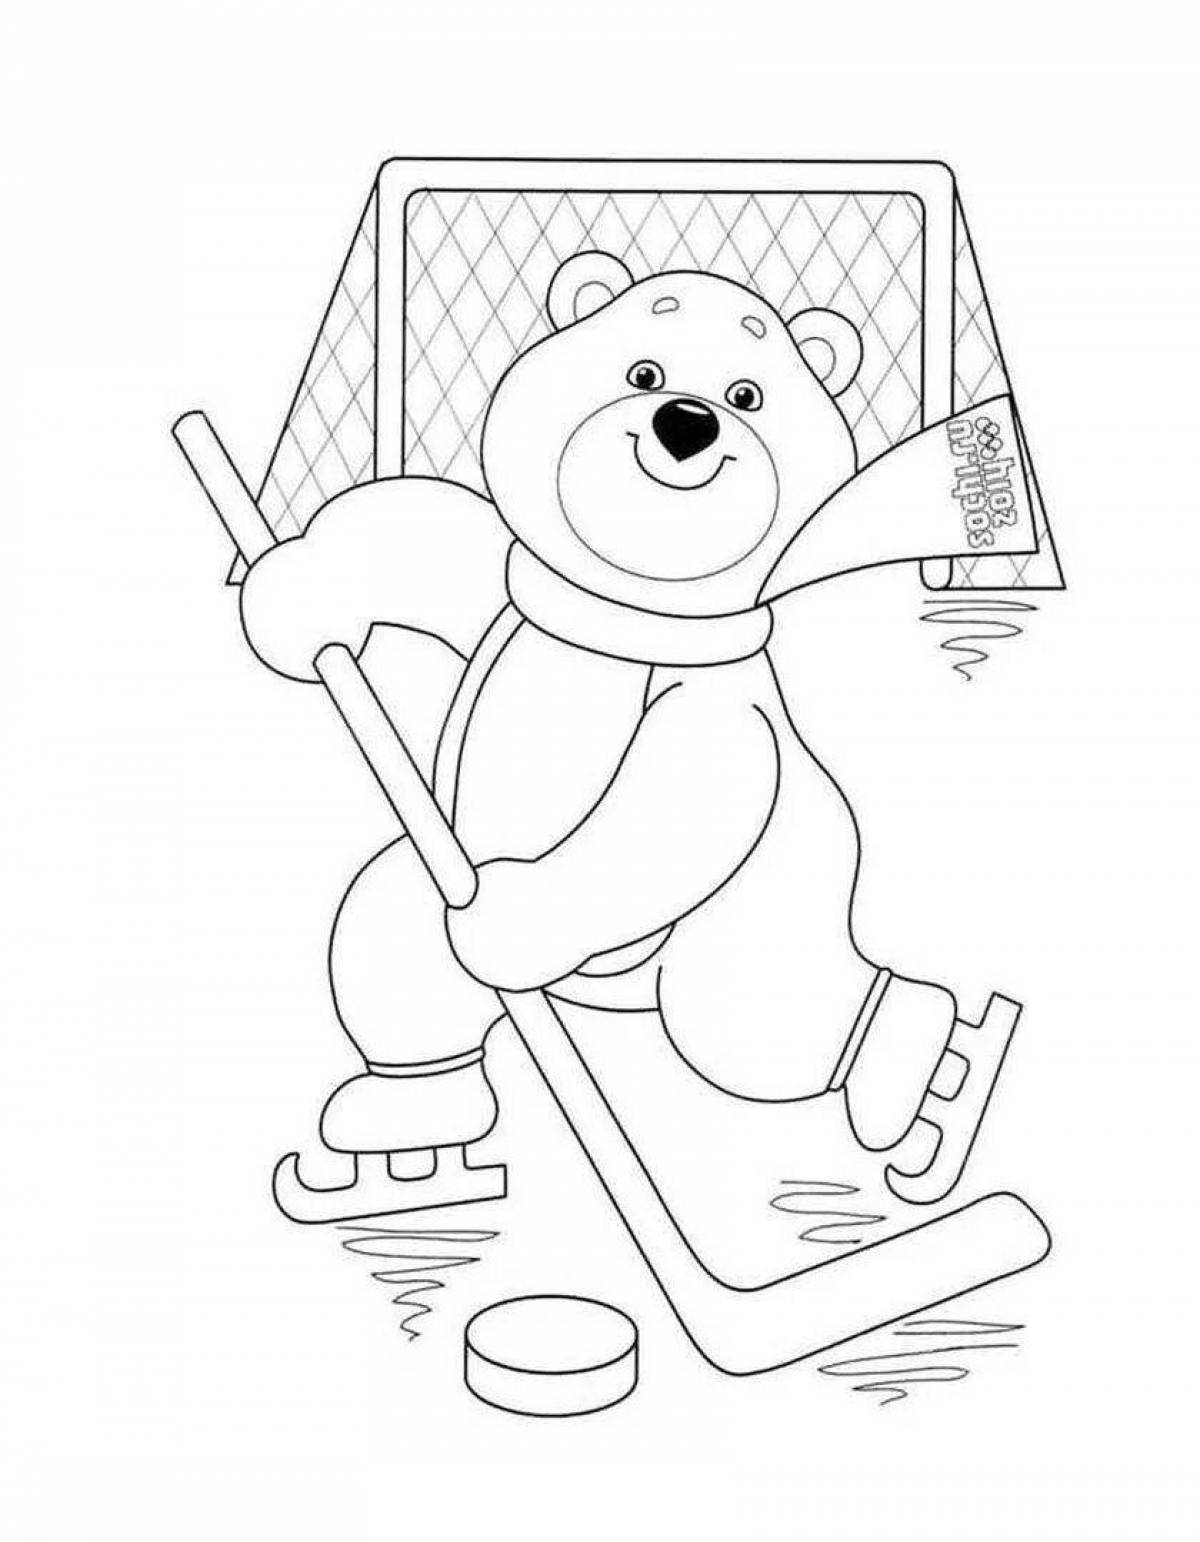 Coloring page adorable olympic bear